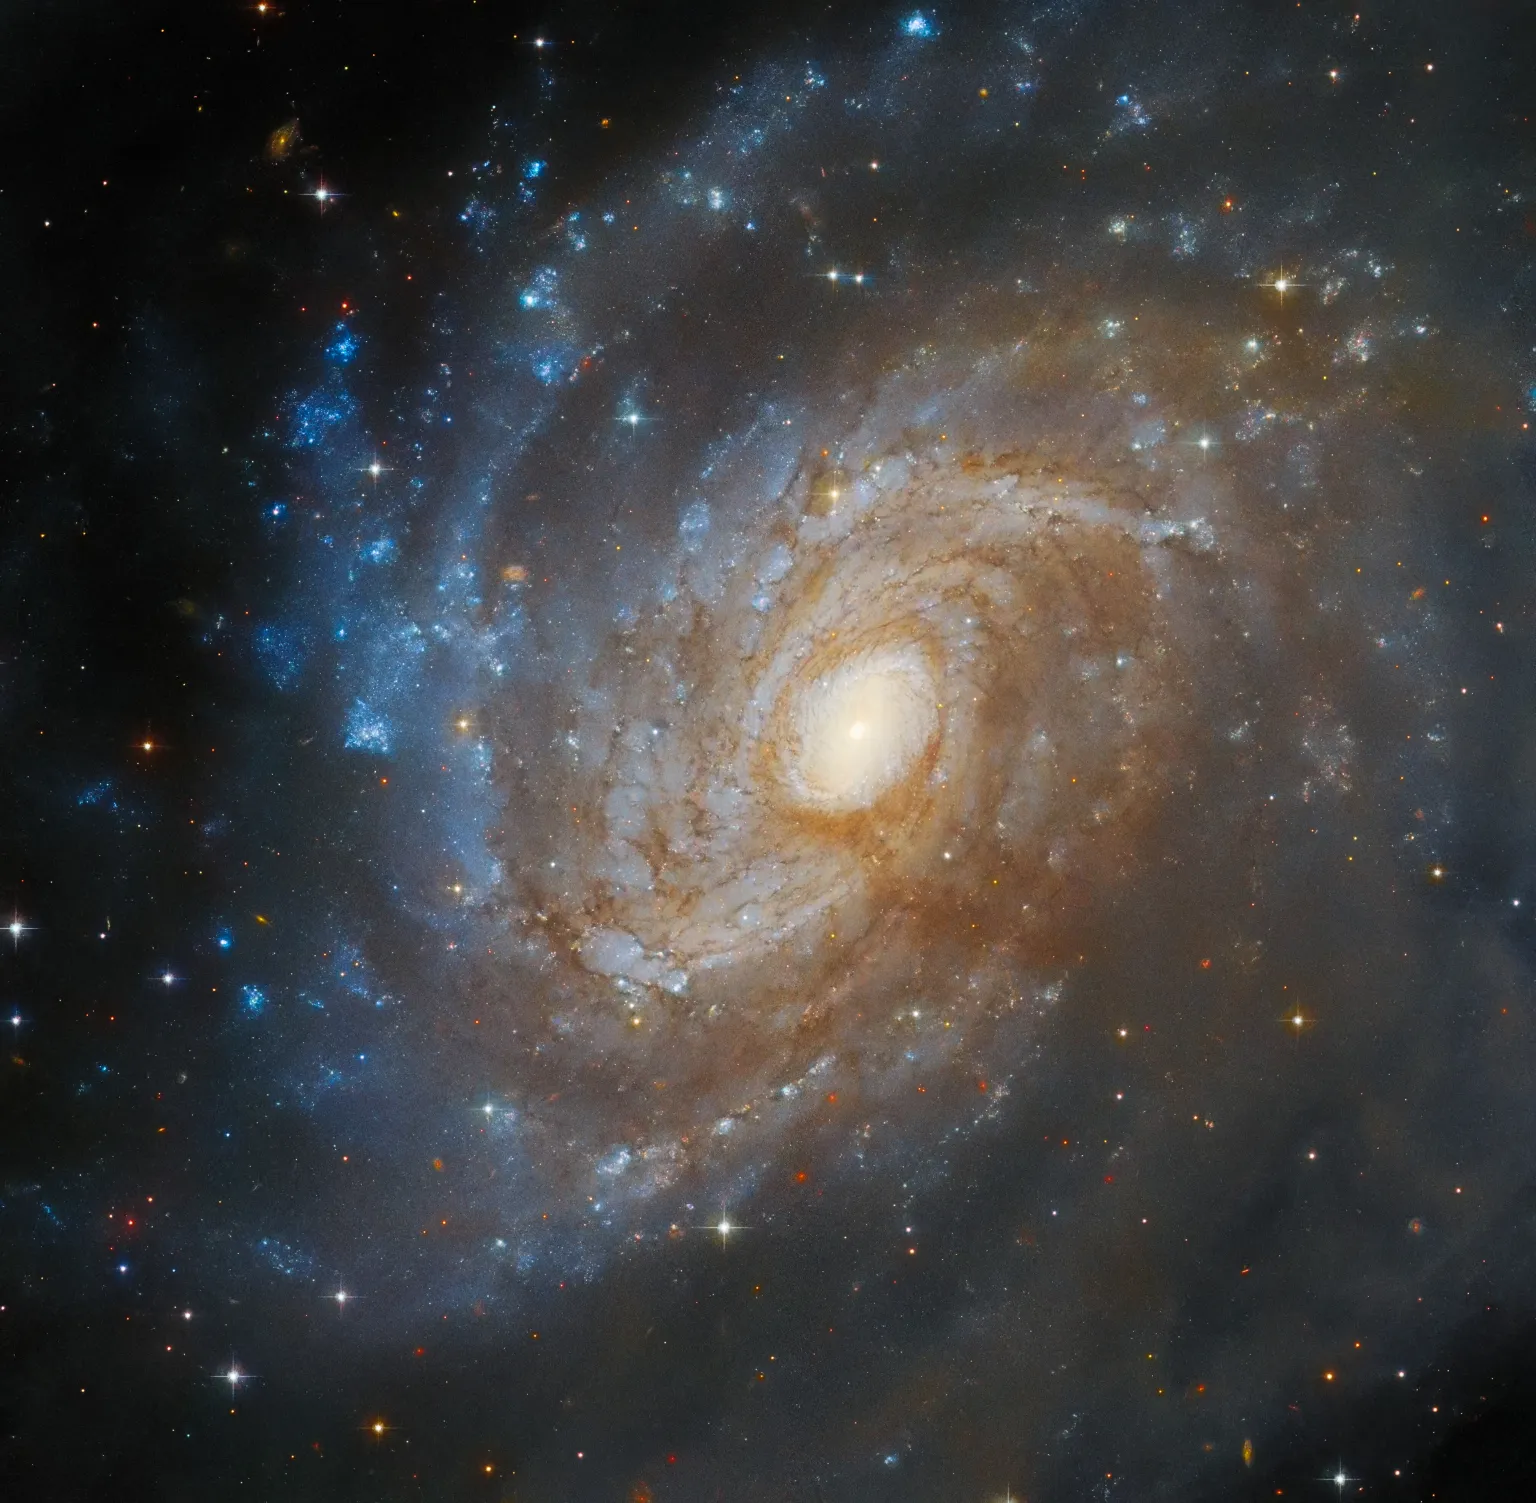 This Hubble image features the spiral galaxy IC 4633.